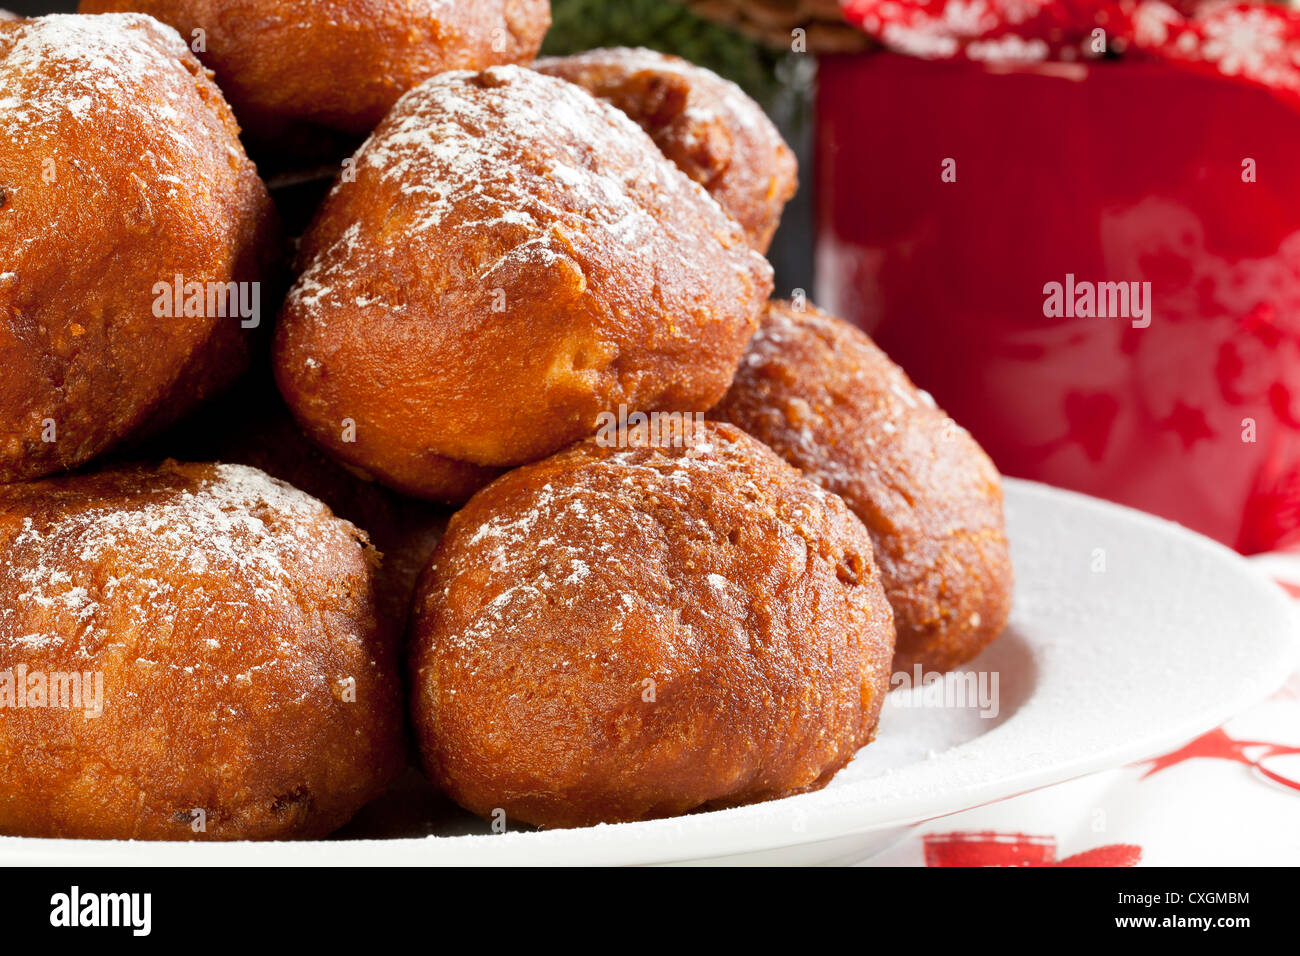 Oliebollen, similar to doughnut holes, a tradition sweet treat in the Netherlands around Christmas Stock Photo